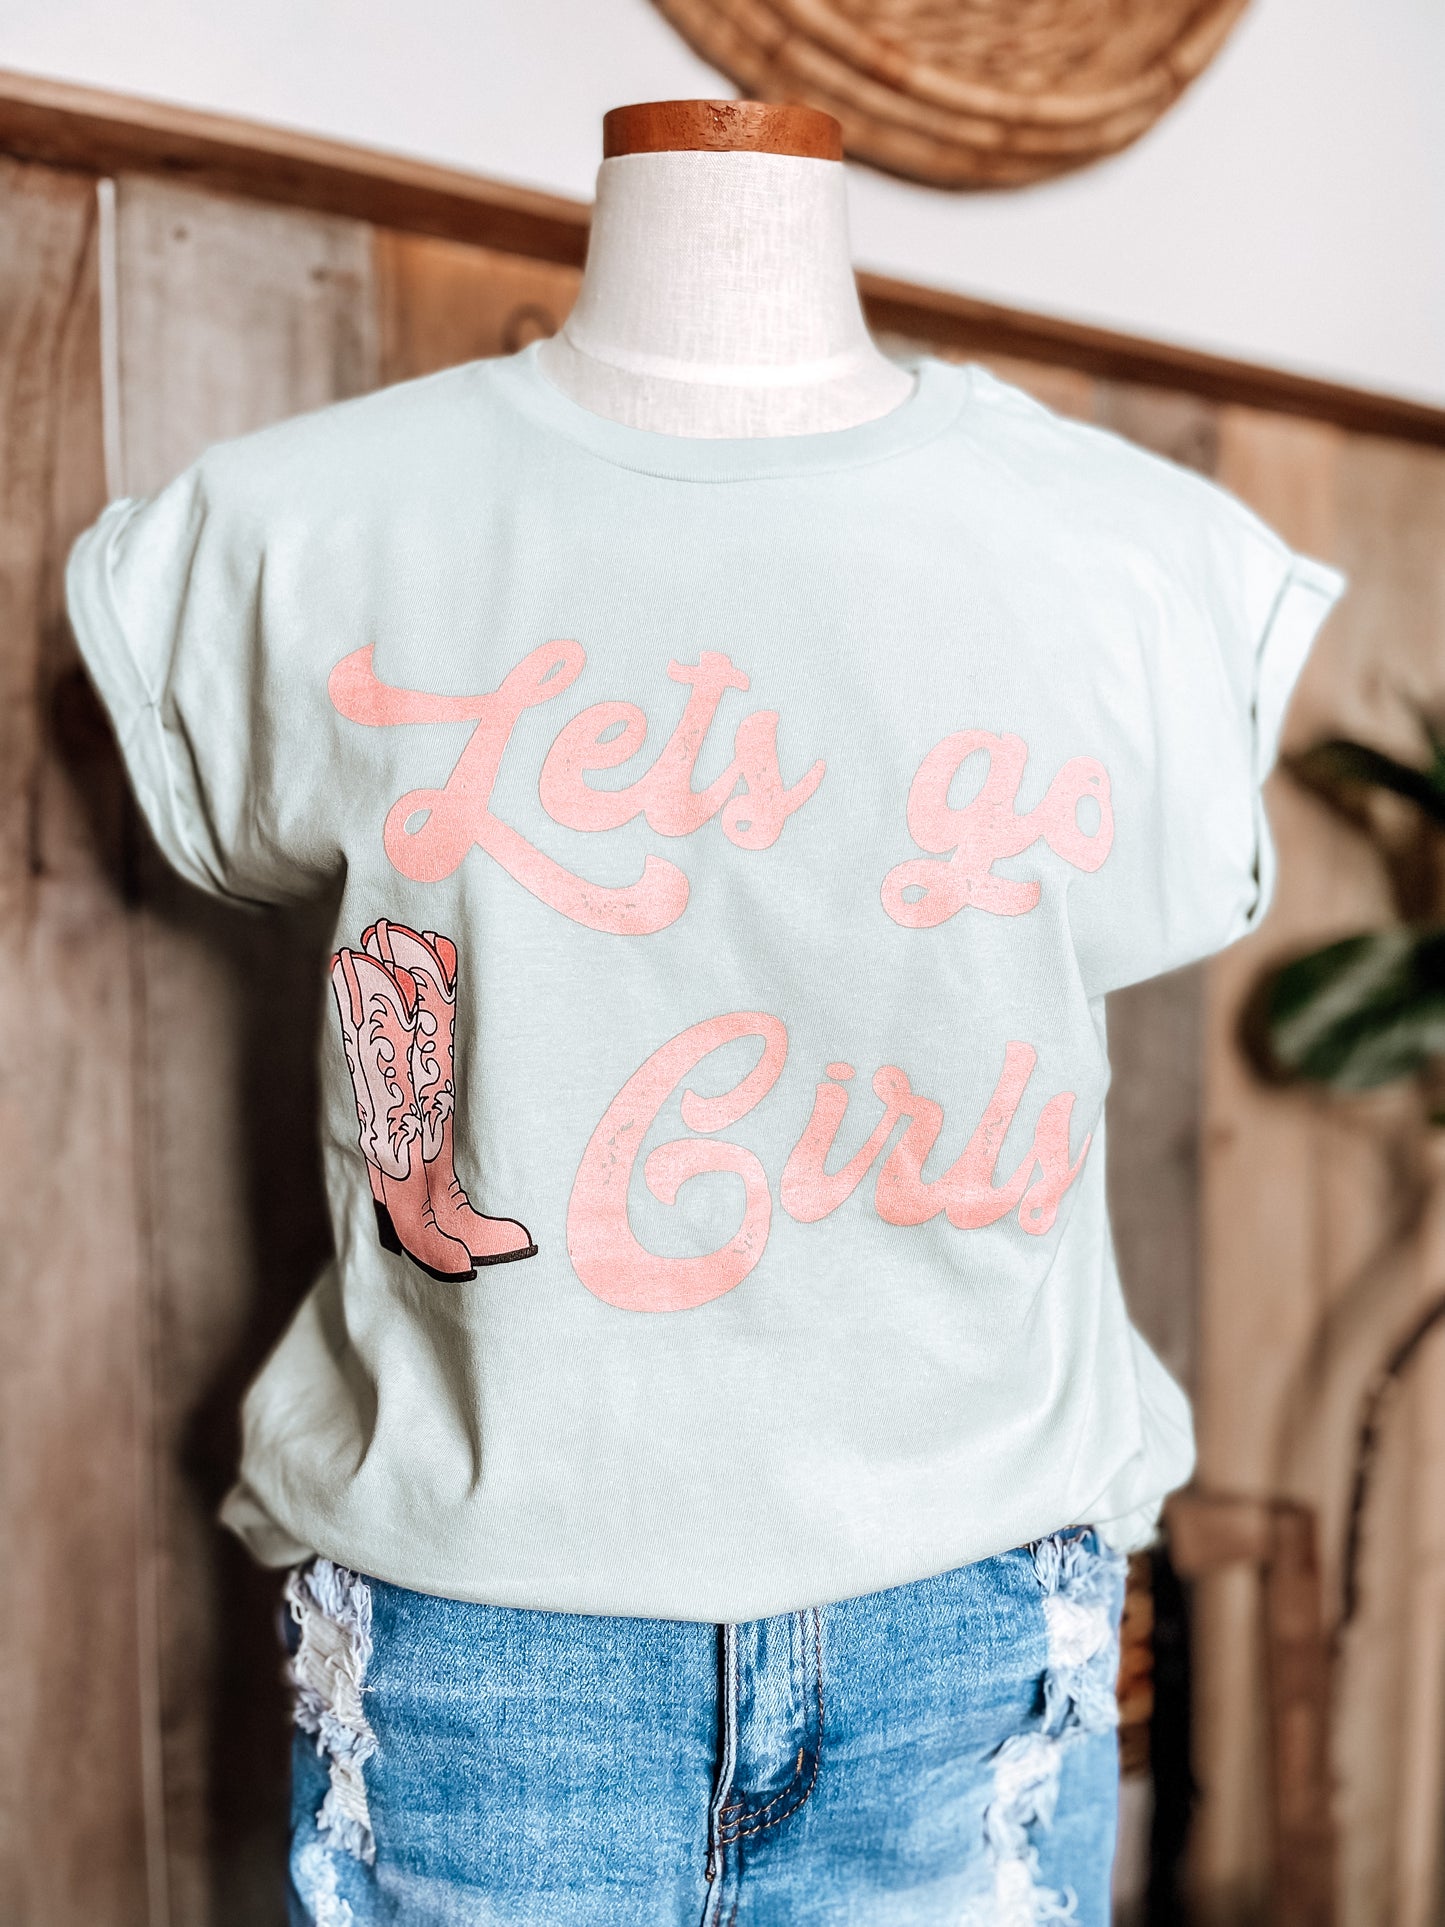 Let’s Go Girls Graphic T-Shirt